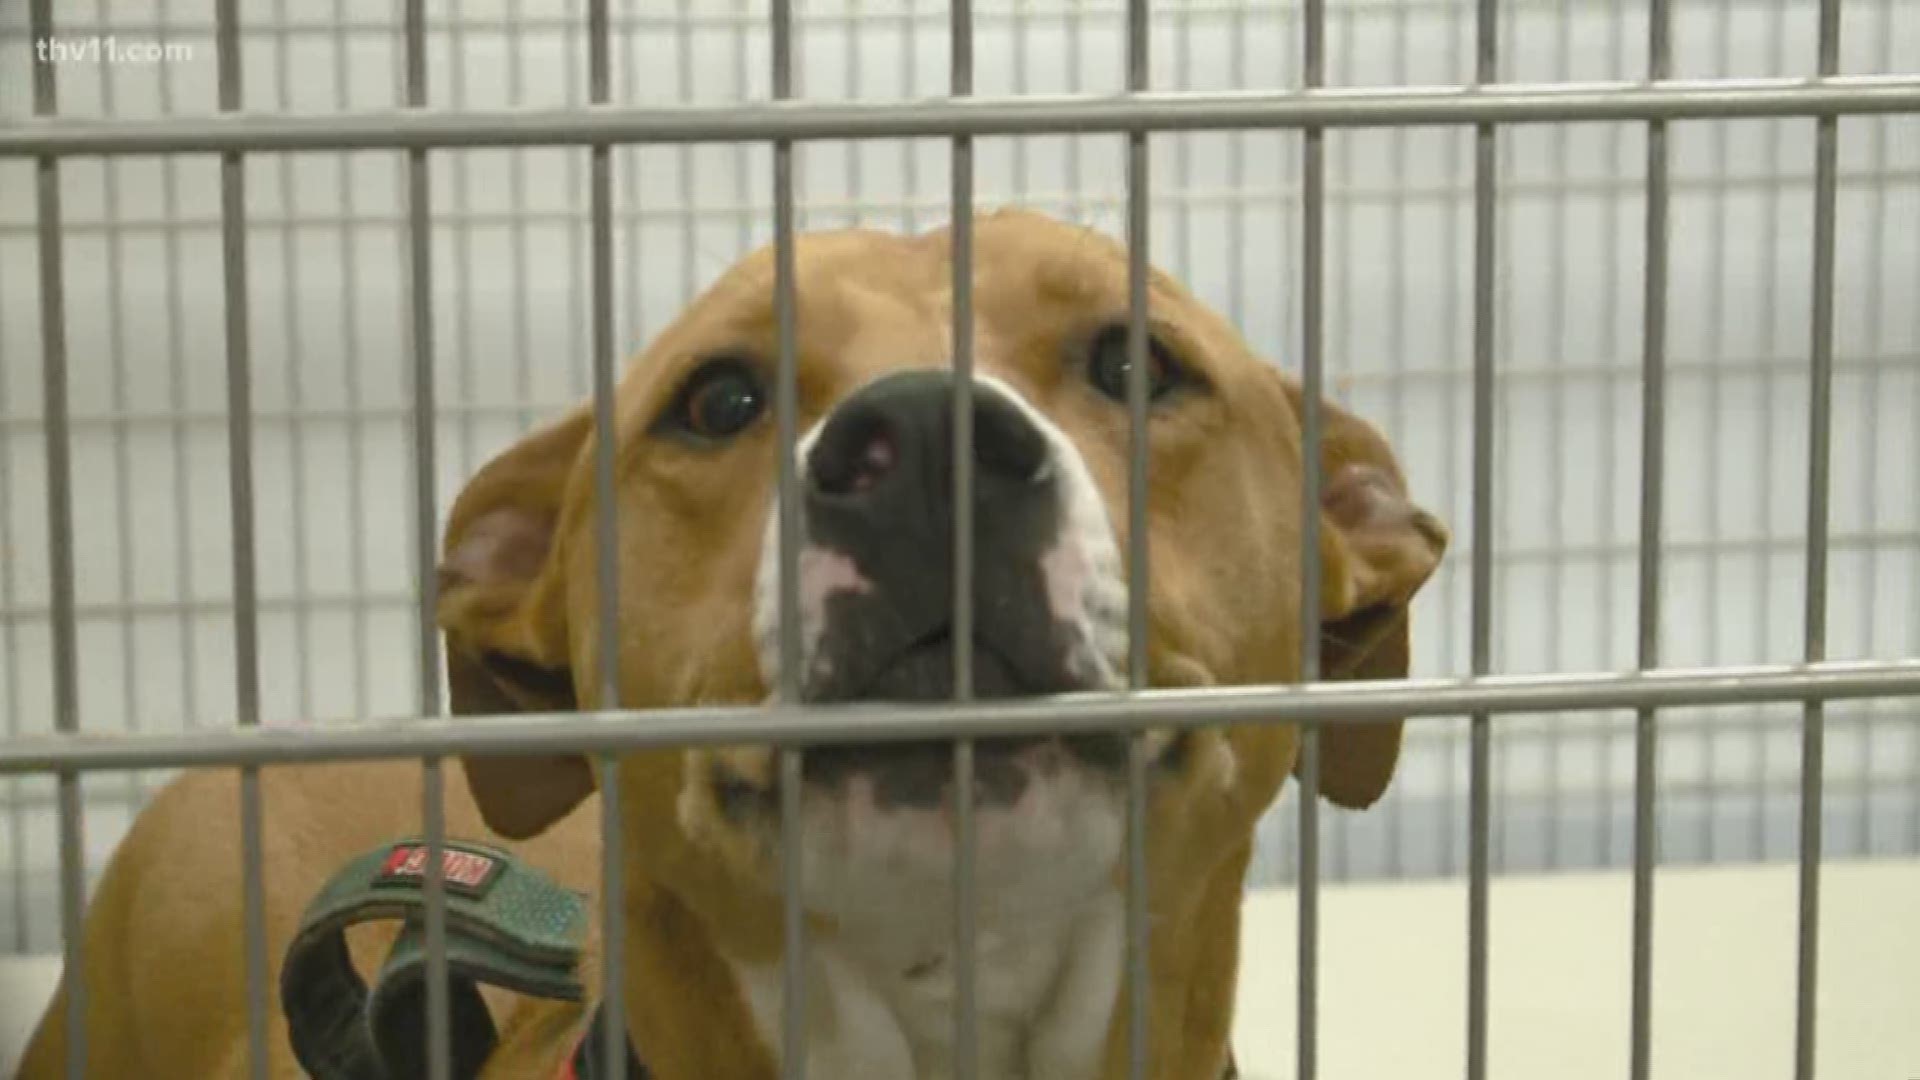 Maumelle Animal Services sees influx of dogs, asks for adoptions